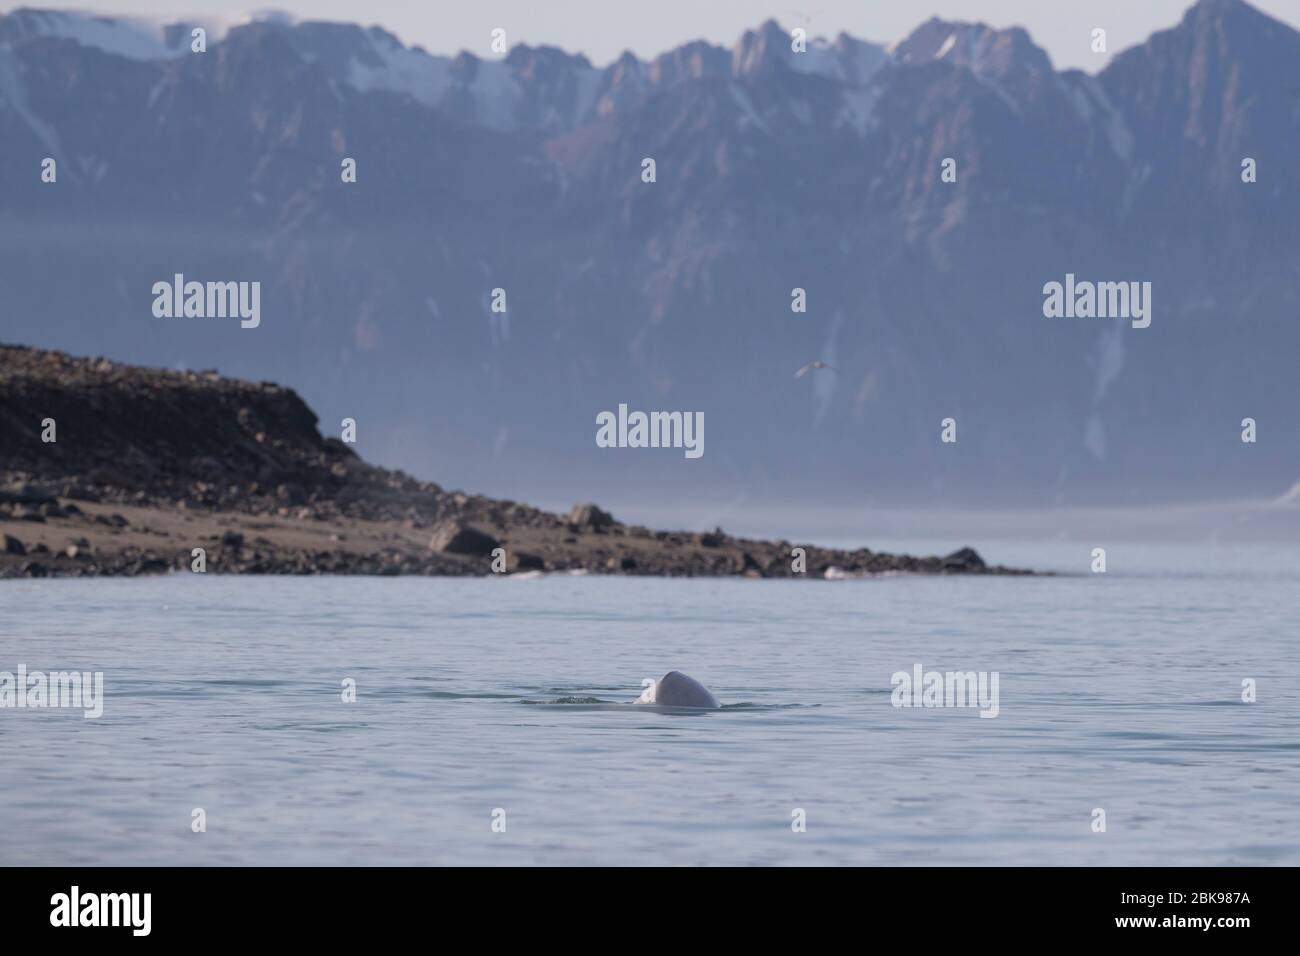 Beluga whale and mountains Stock Photo